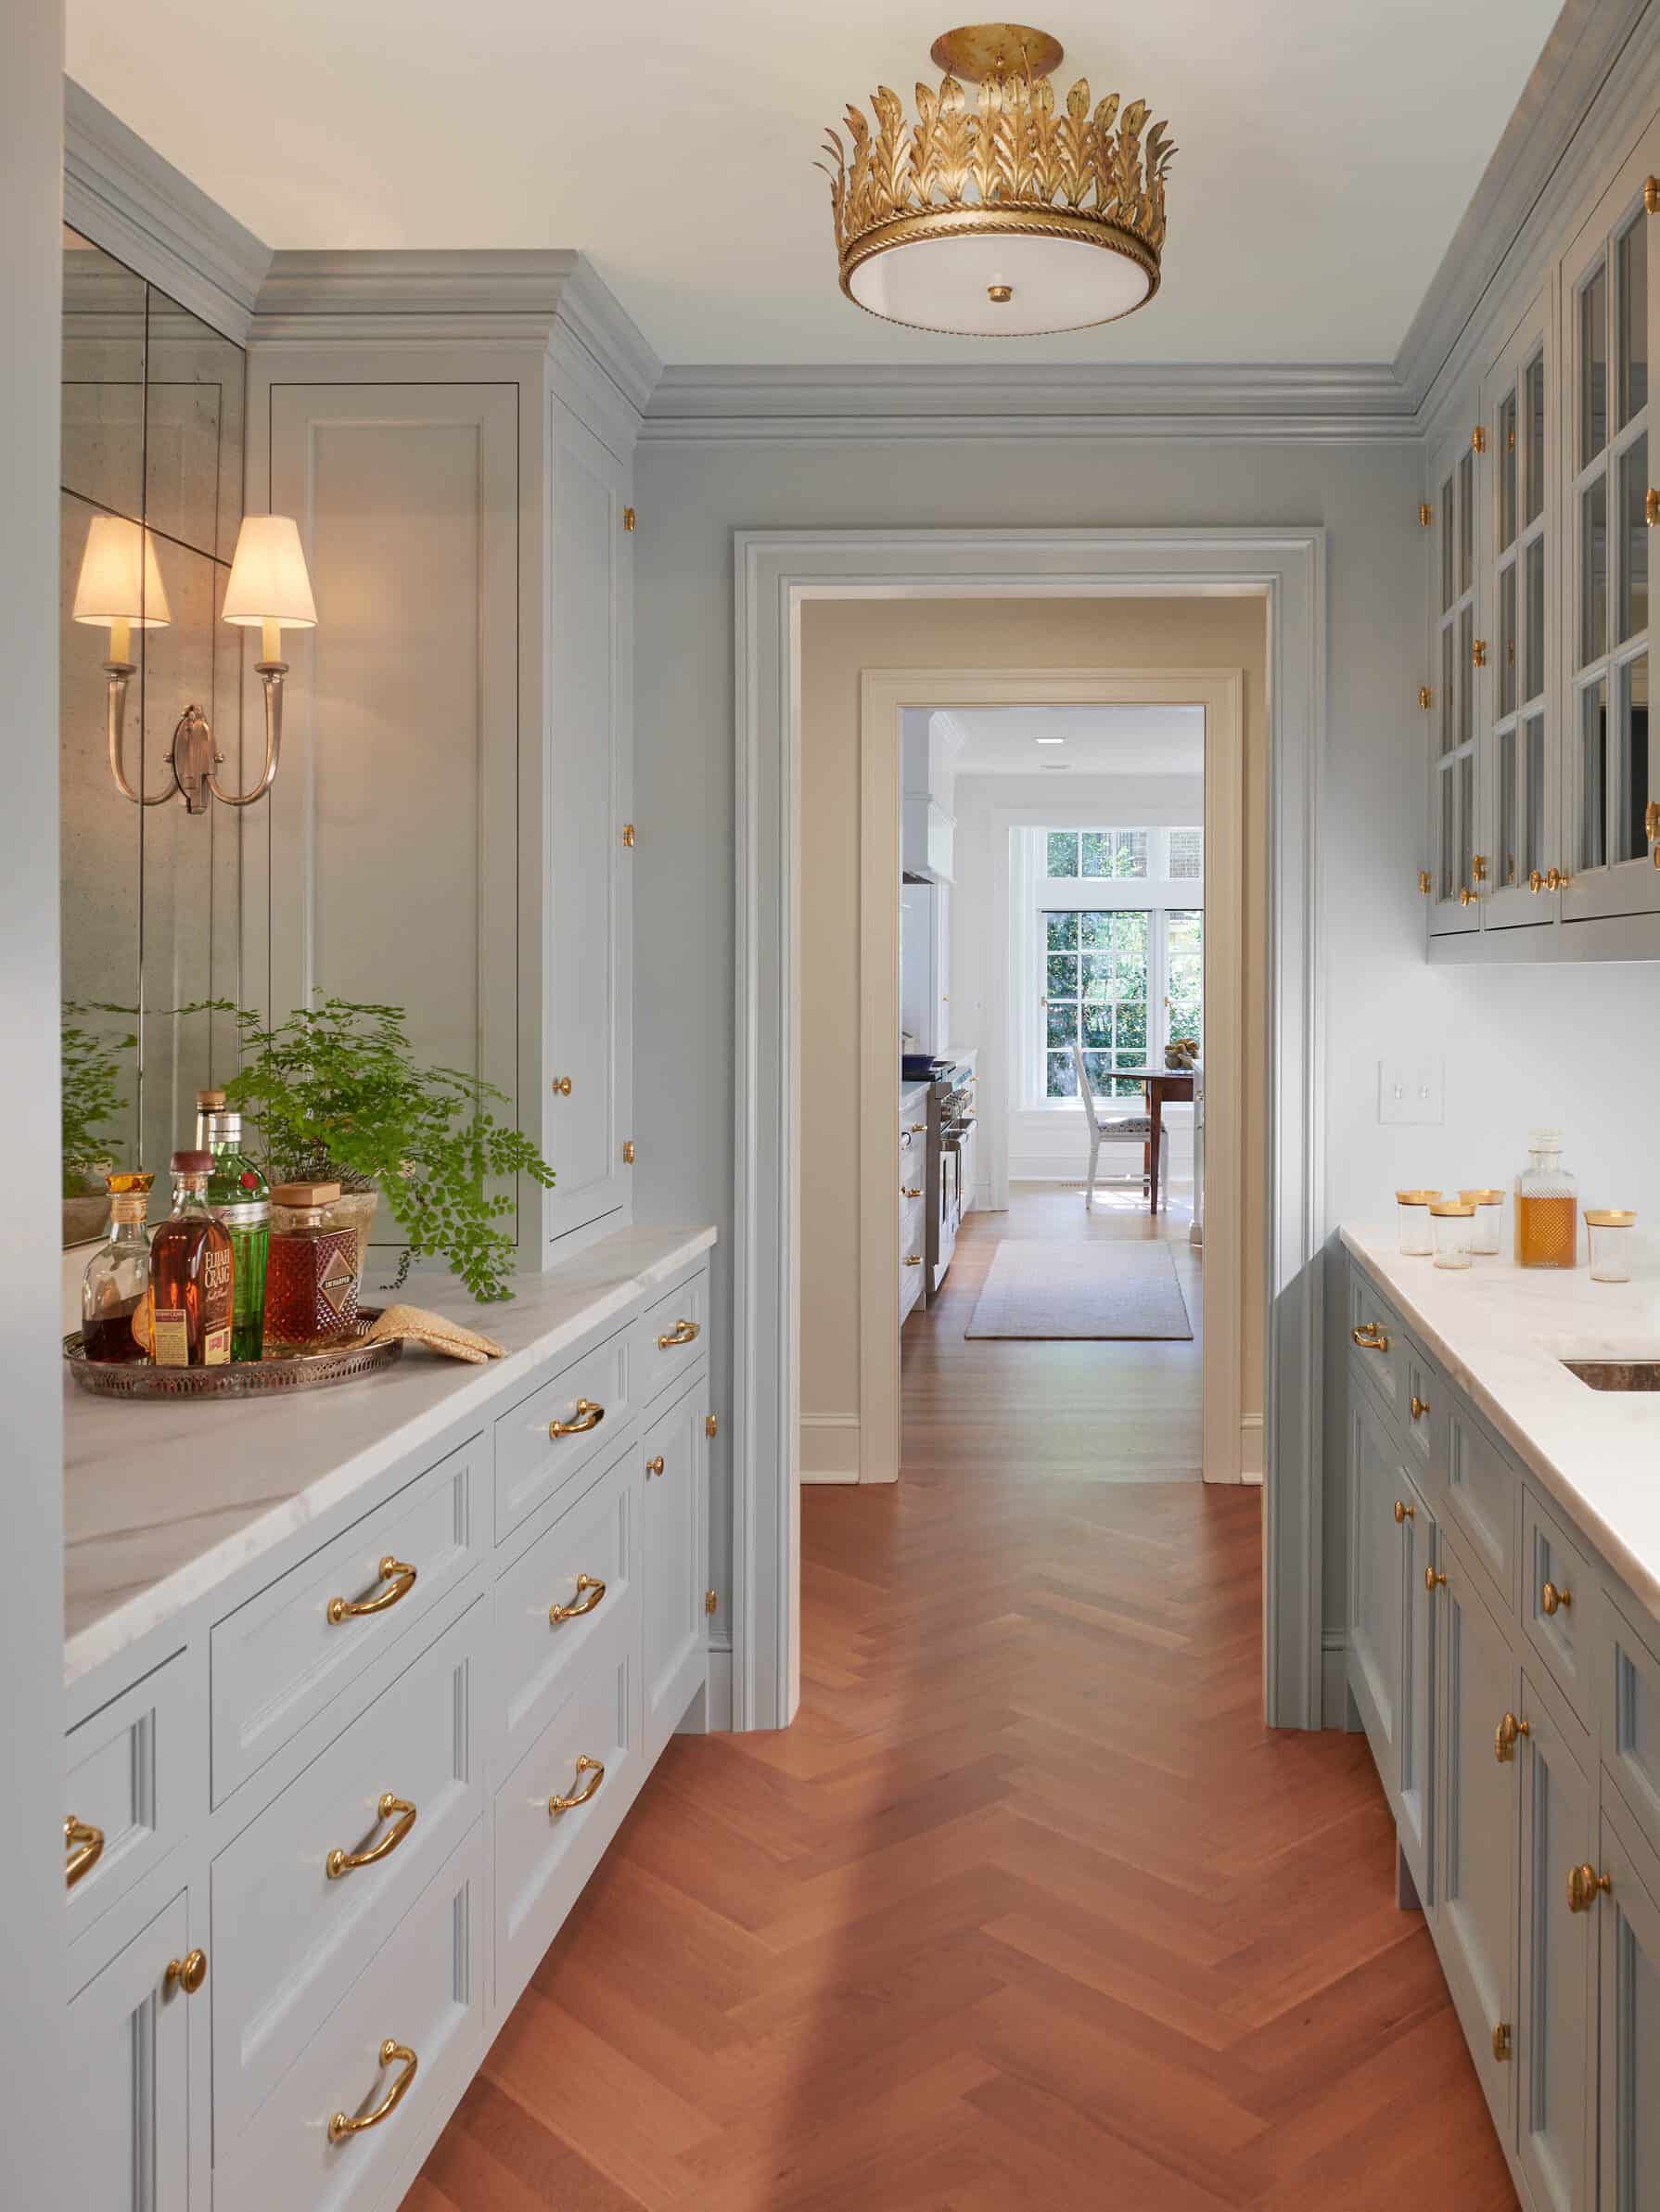 gorgeous pass-through butler's pantry in a New Colonial design style.